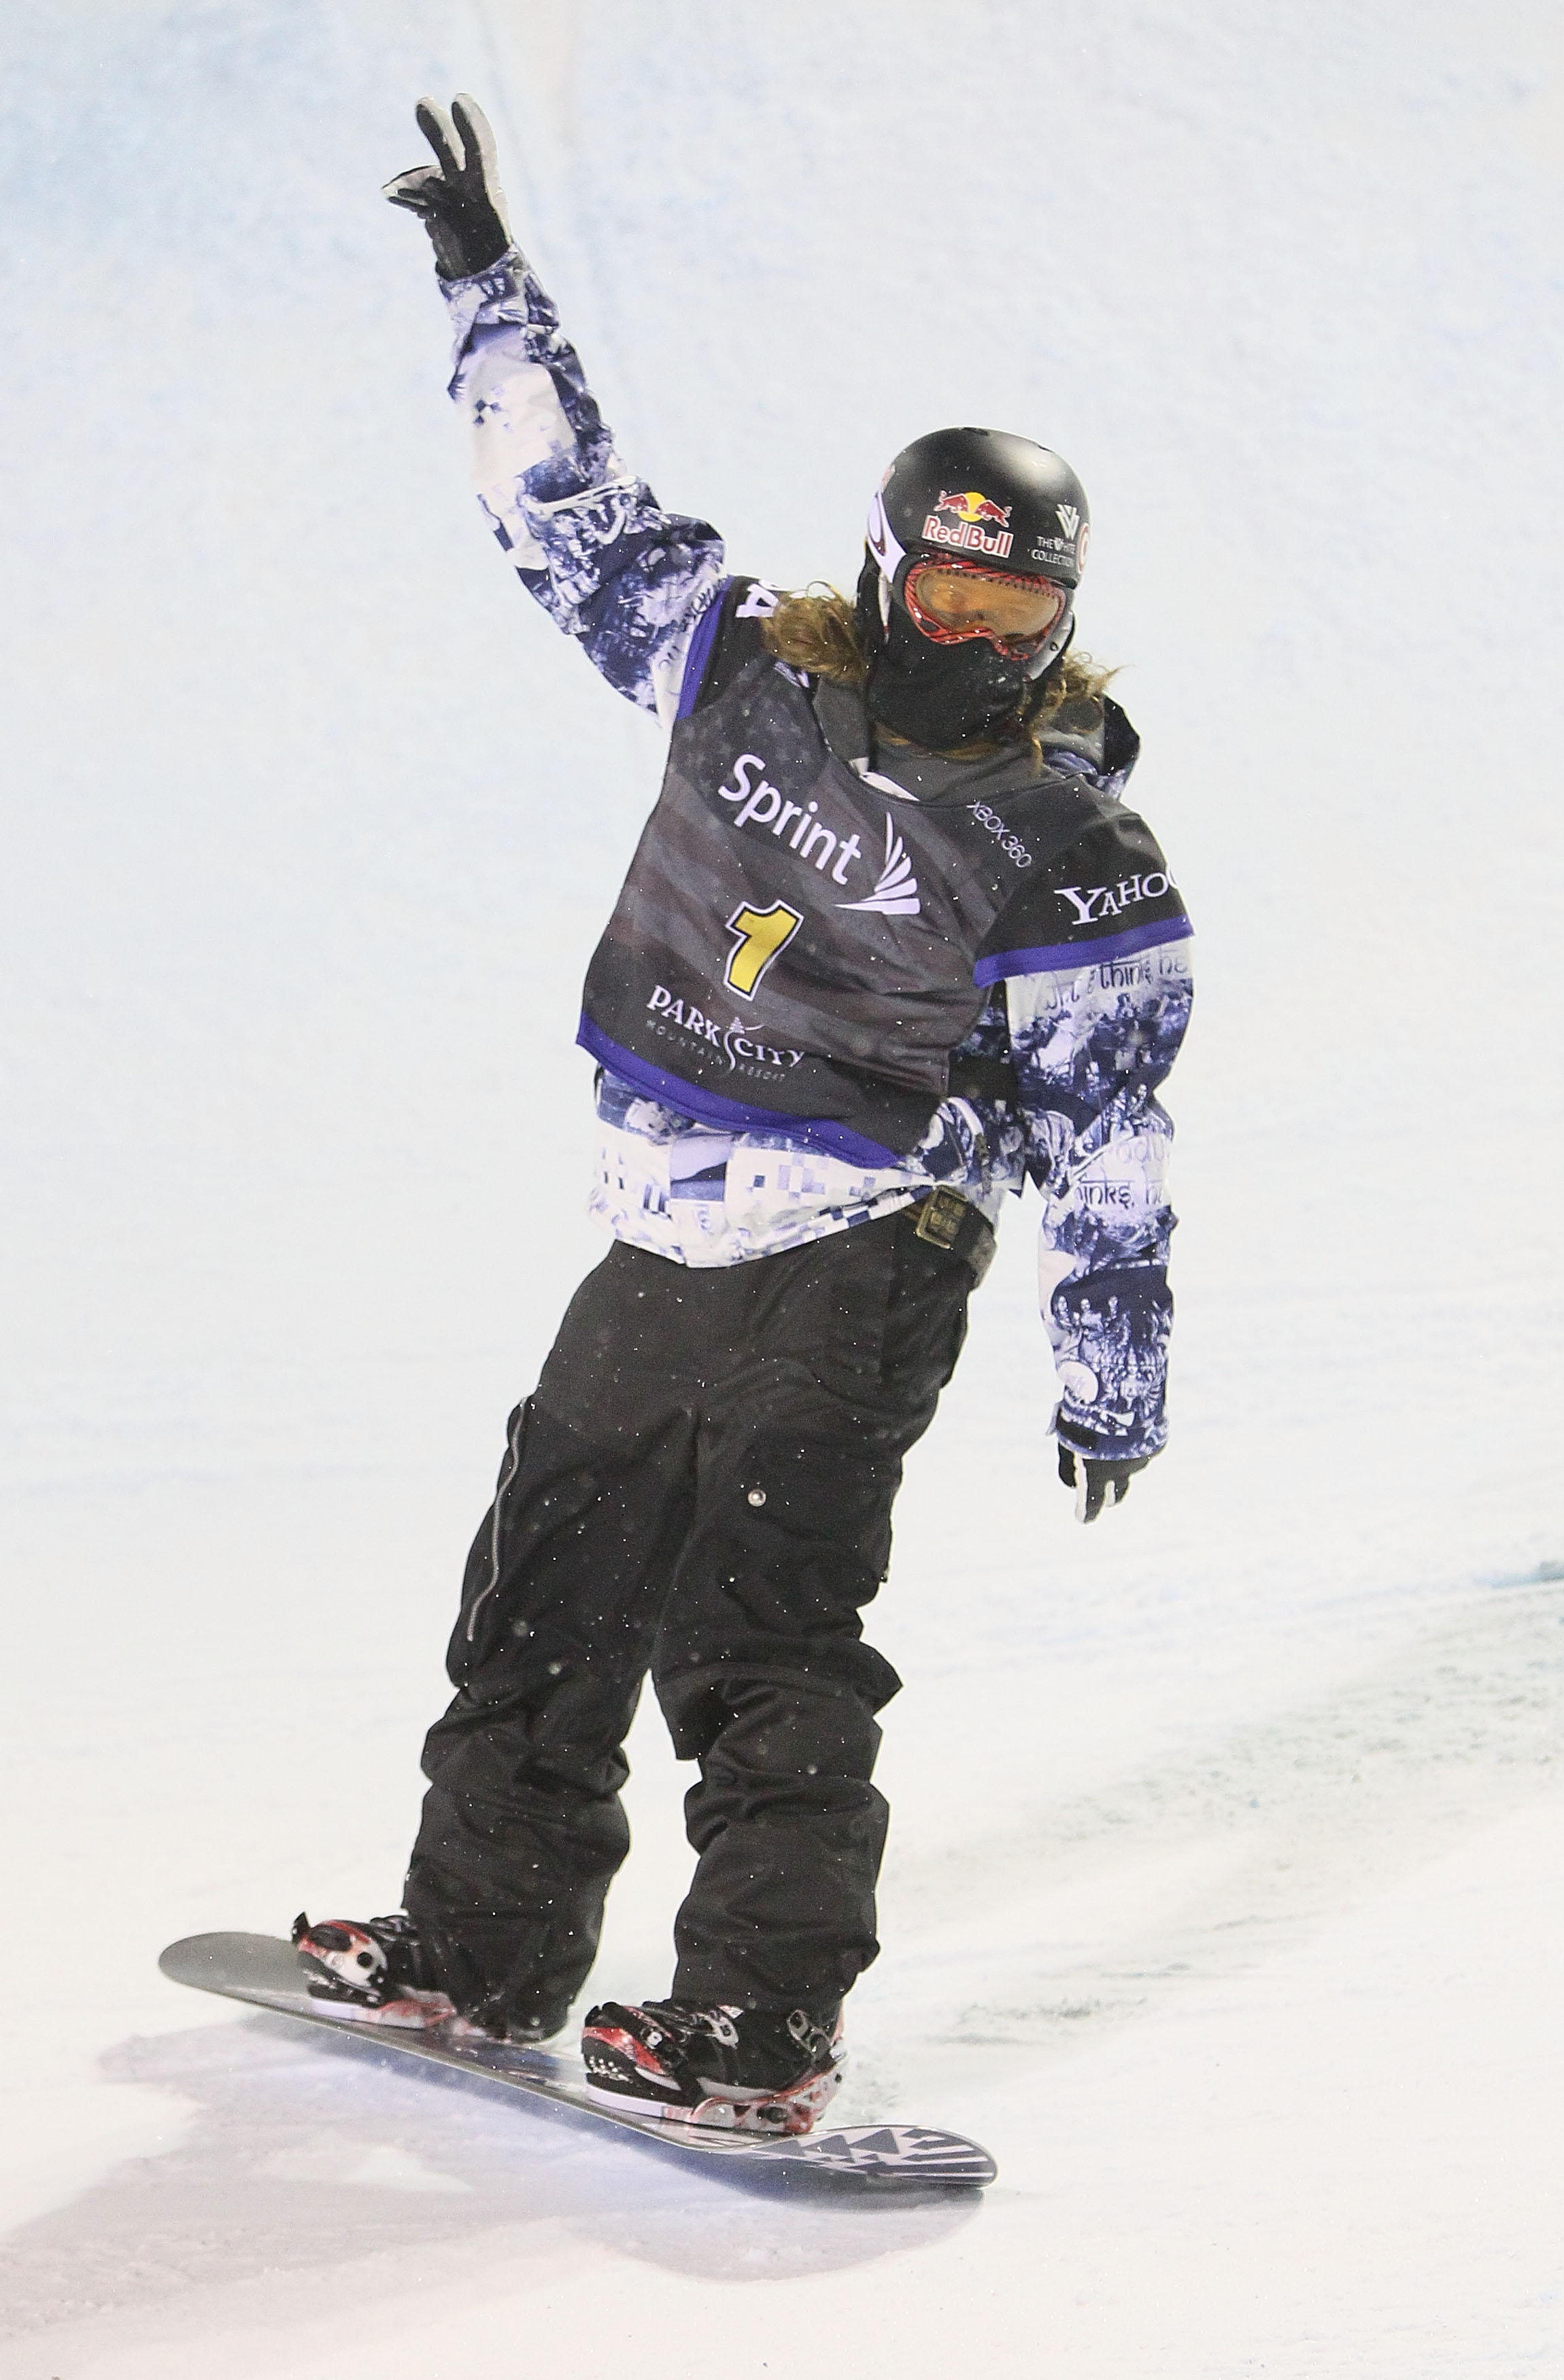 Winter X Games 15 Shaun White and Top 10 Olympians Competing in Aspen